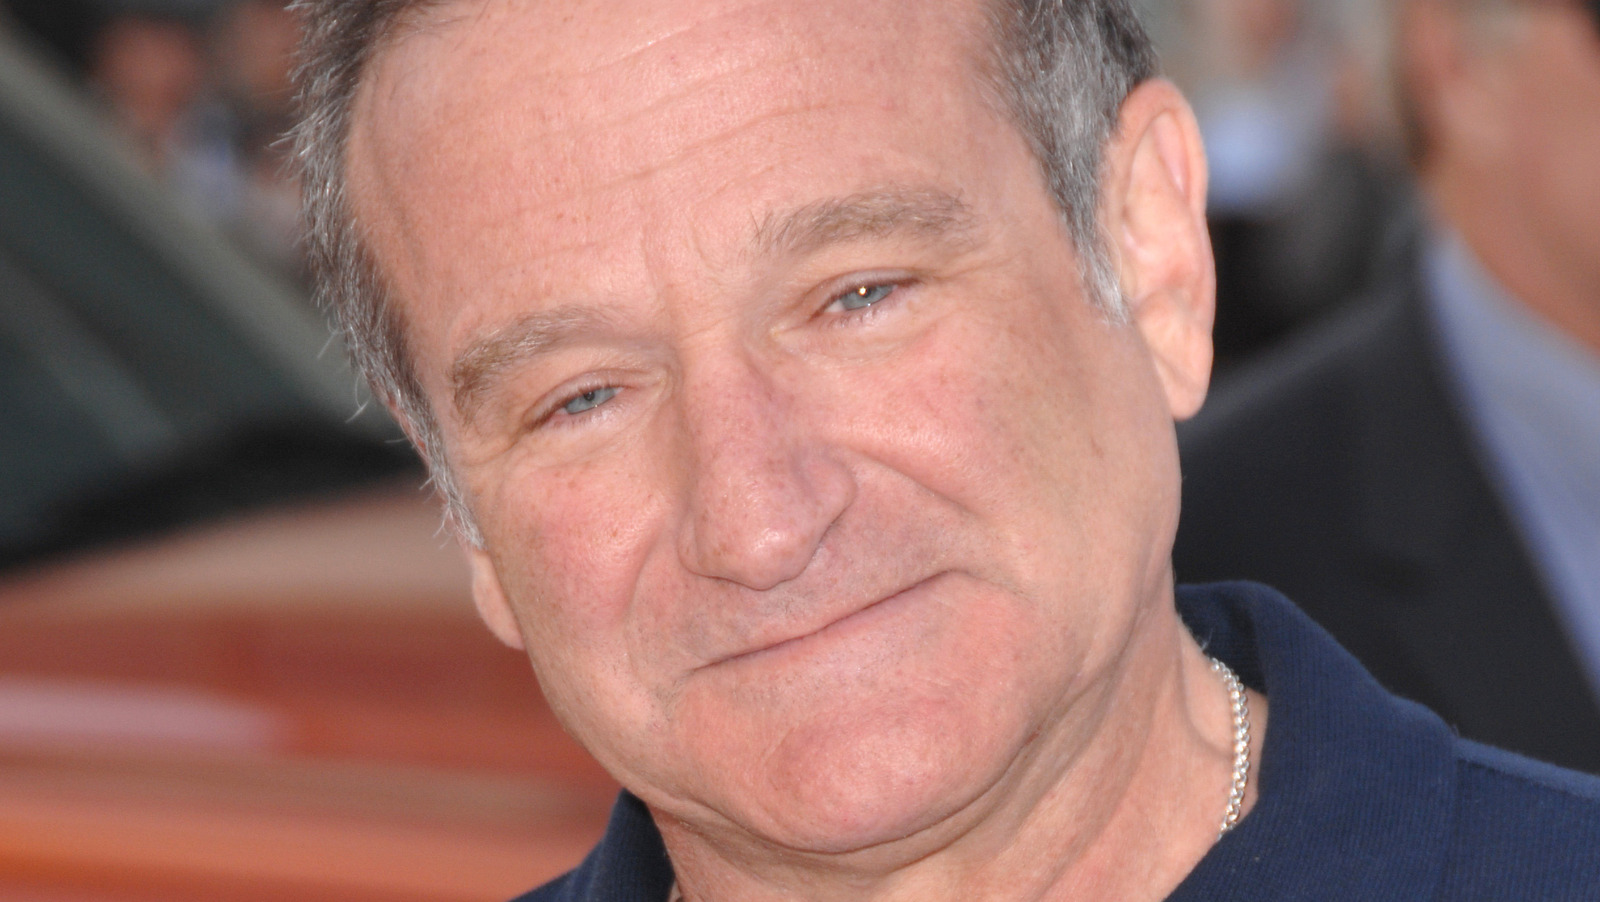 Robin Williams: Biography, Actor, Comedian